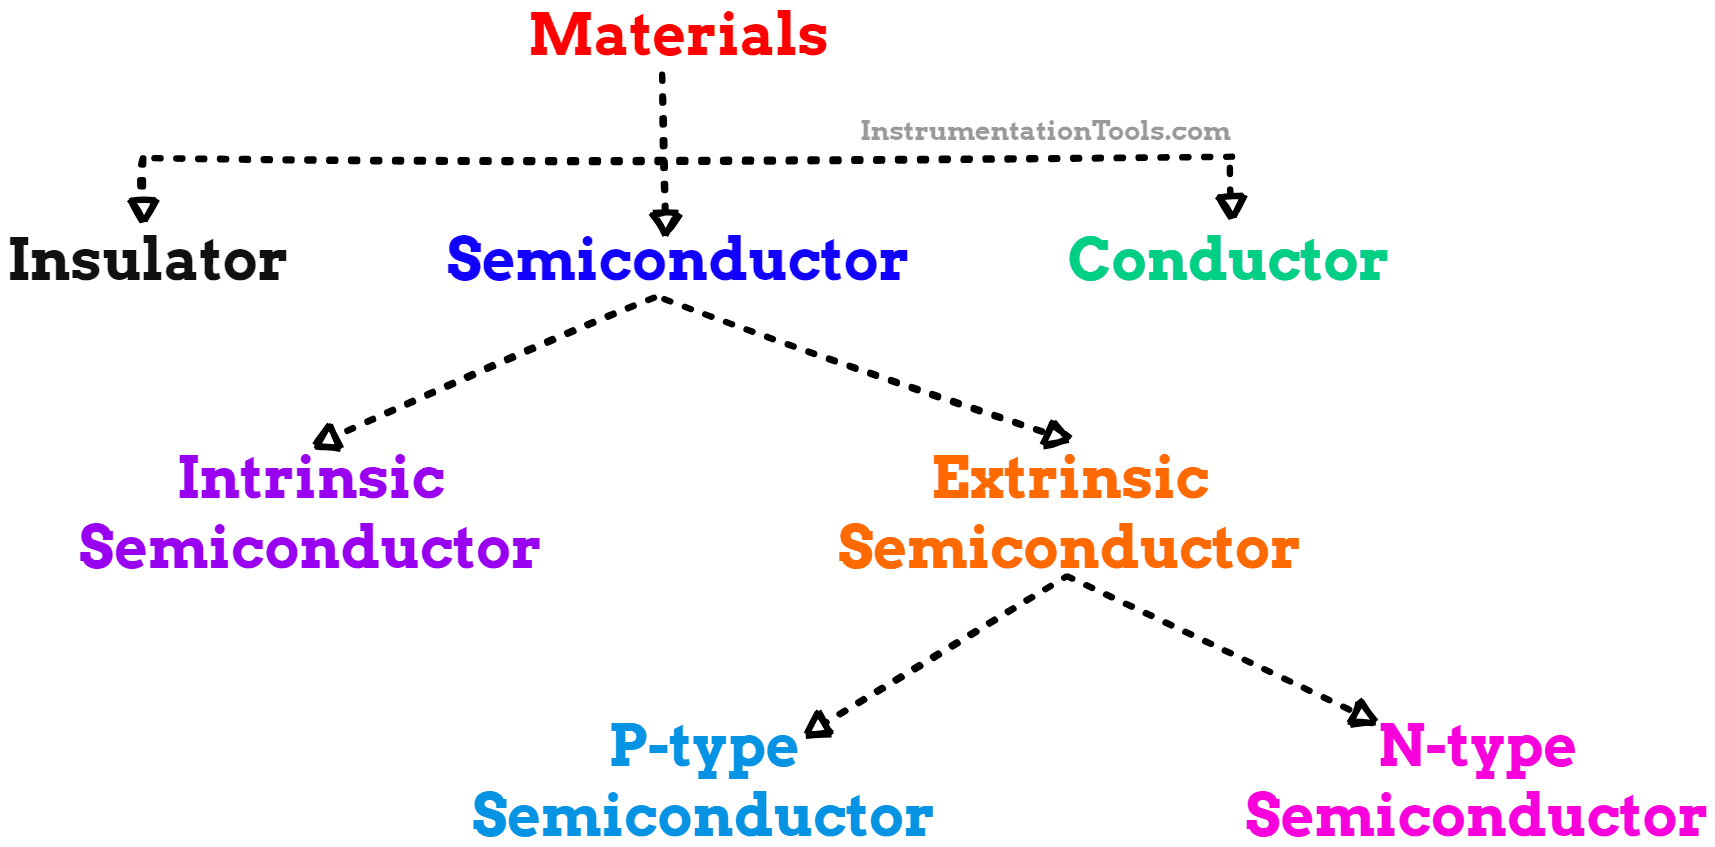 Introduction to Semiconductor Electronics